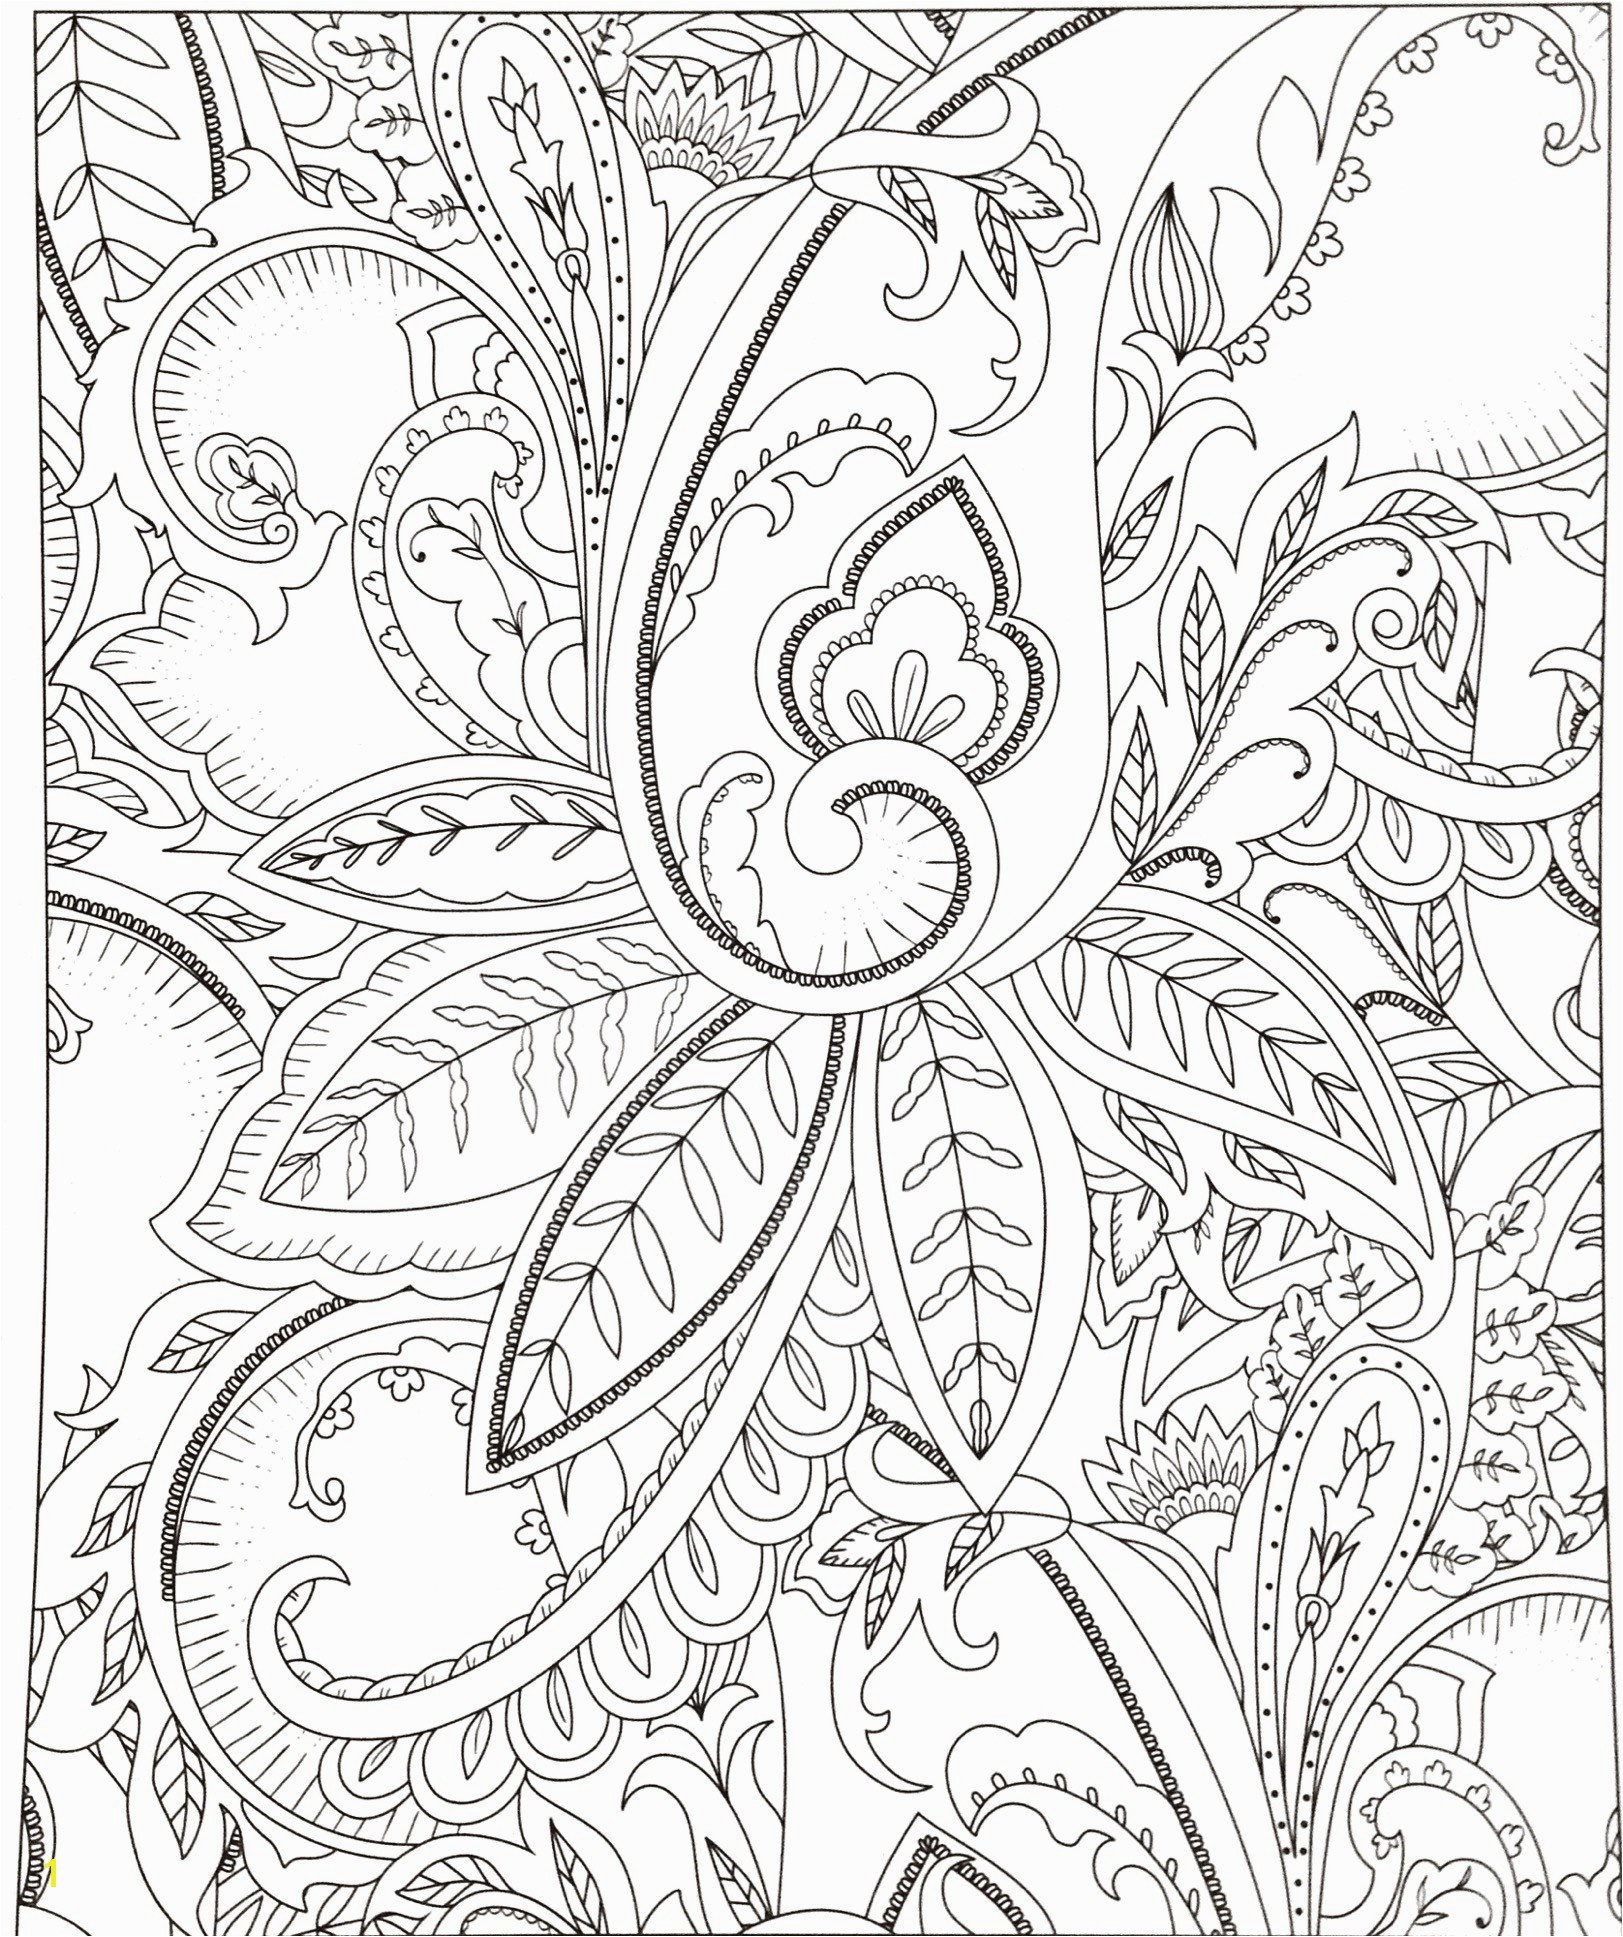 Little Flower Vases Of Pretty Coloring Pages Of Flowers Zabelyesayan Com Throughout Cool Vases Flower Vase Coloring Page Pages Flowers In A top I 0d